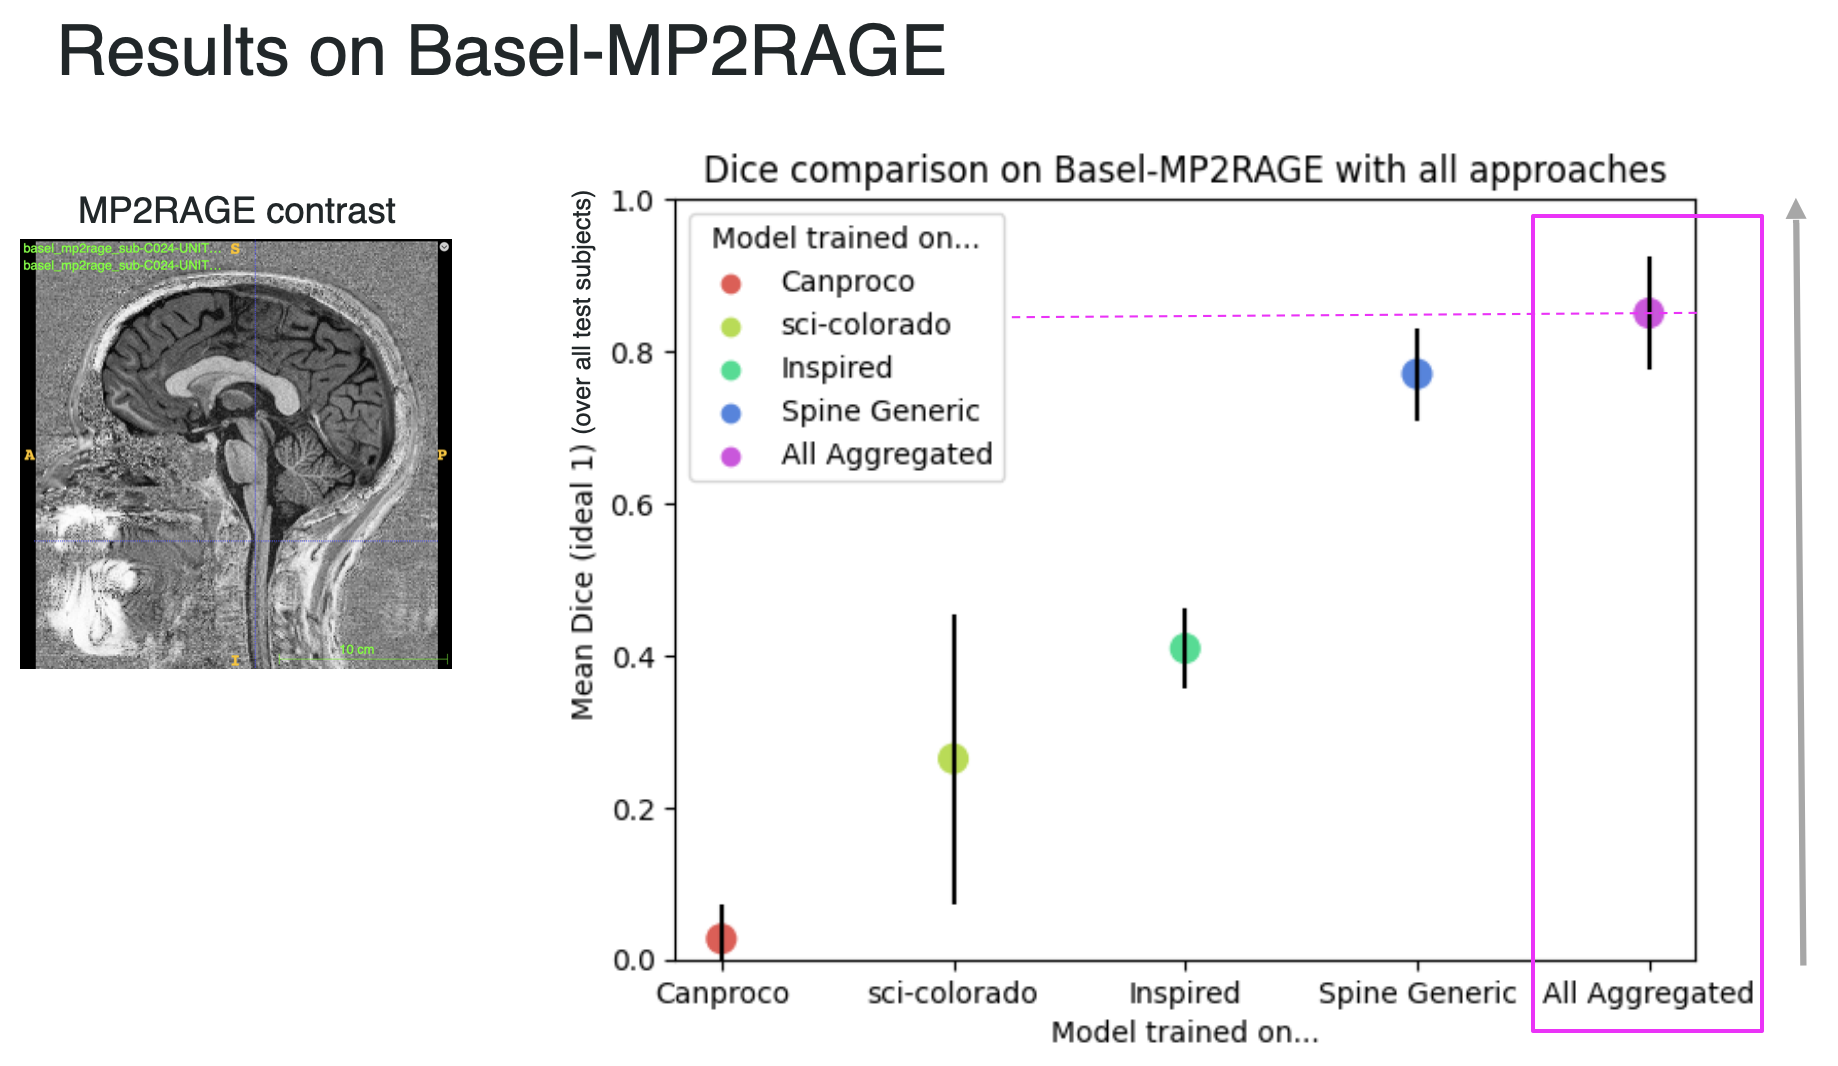 Dice comparison on Basel-MP2RAGE with all approaches